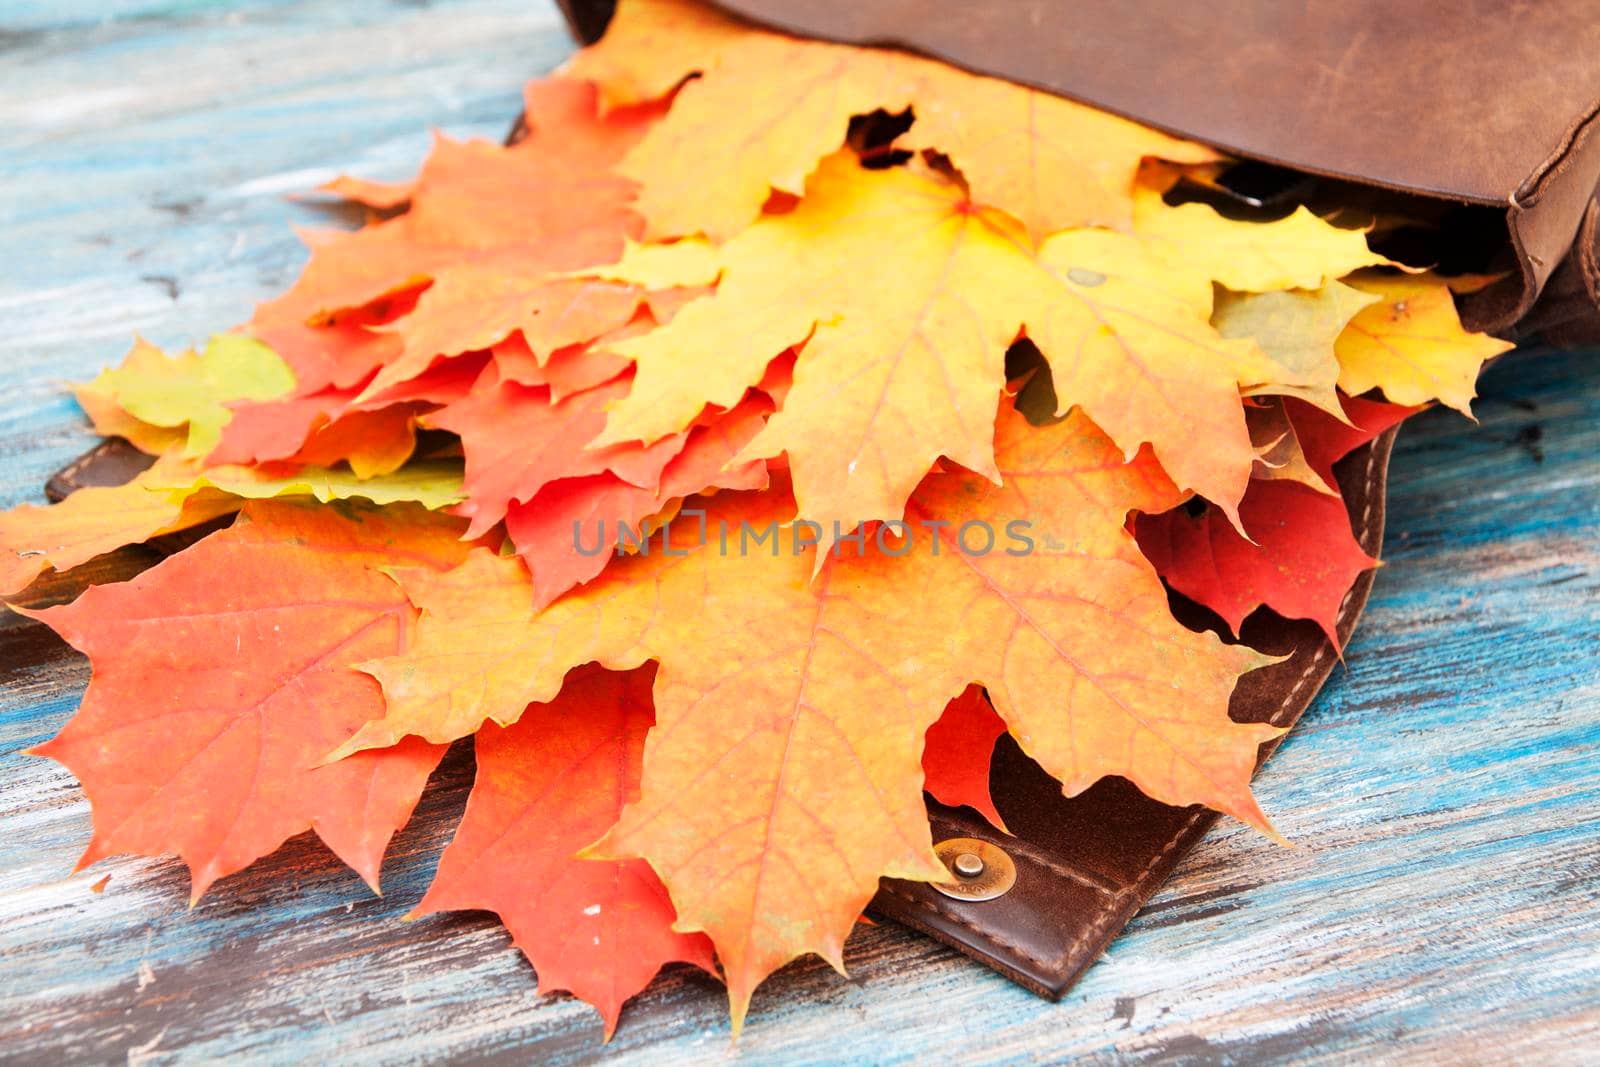 Bright orange, red autumn leaves in an leather bag. Autumn concept